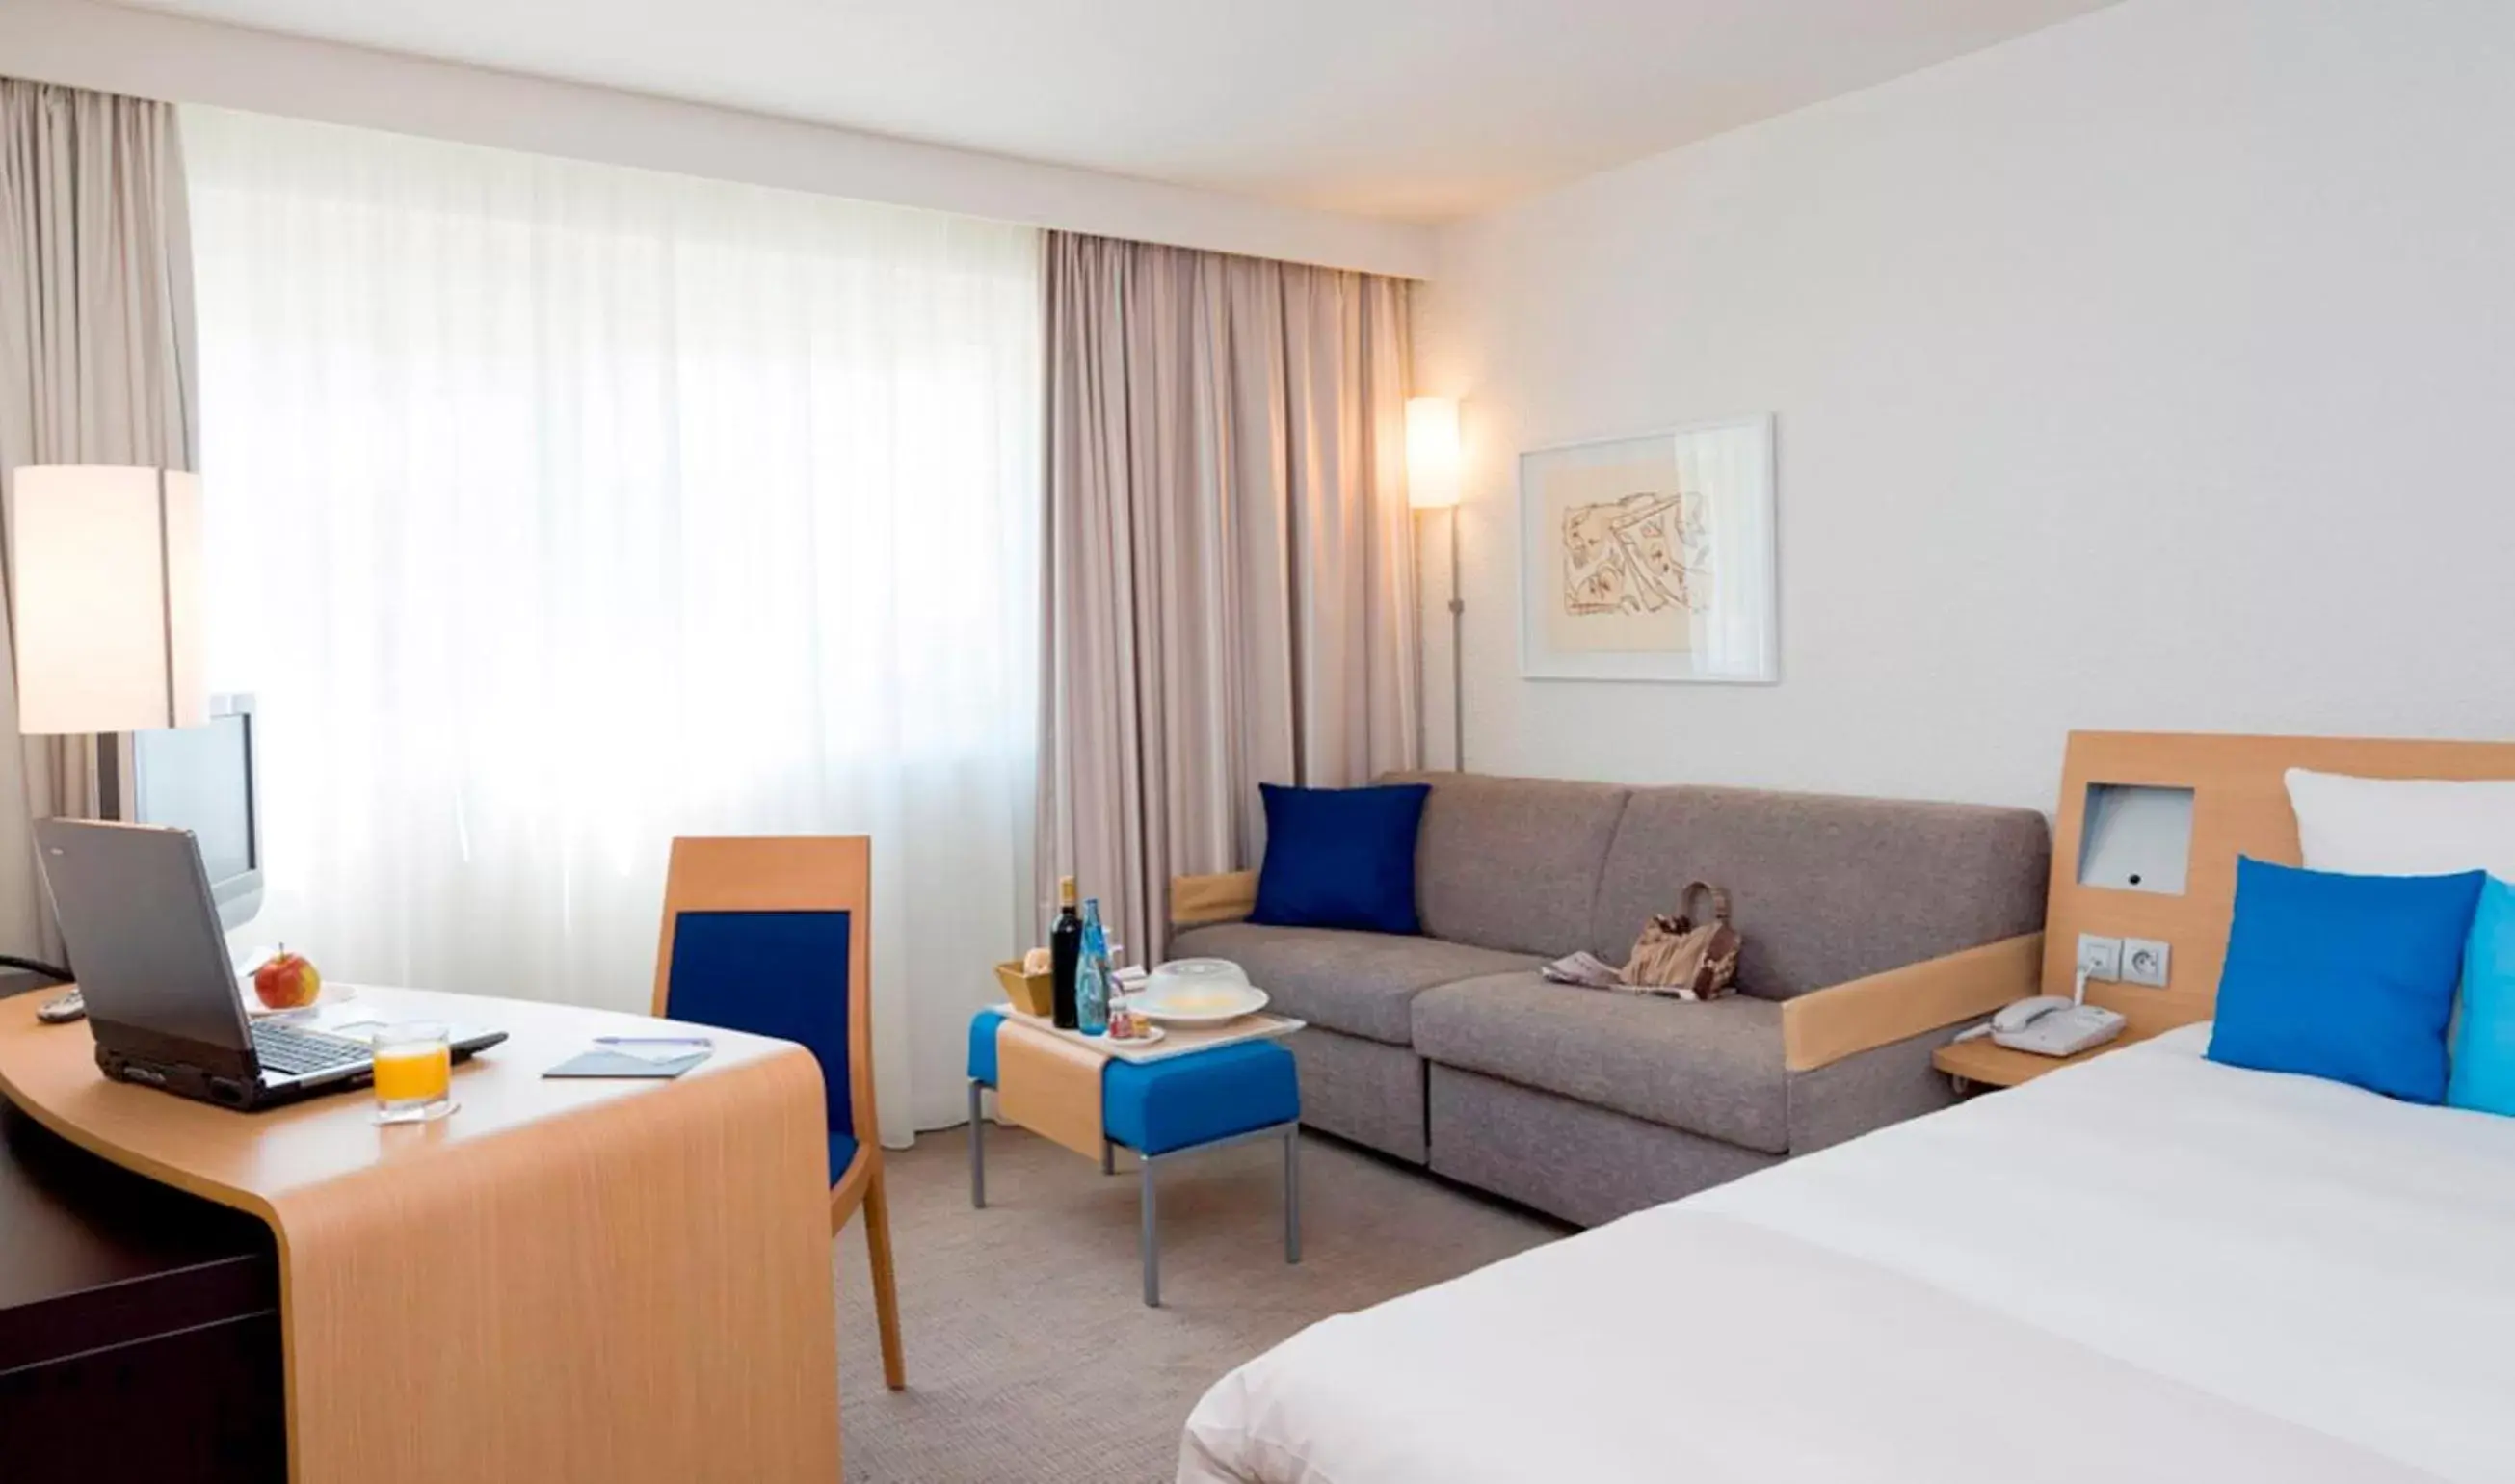 Superior Room with 1 Double bed and Sofa in Novotel Saint Avold